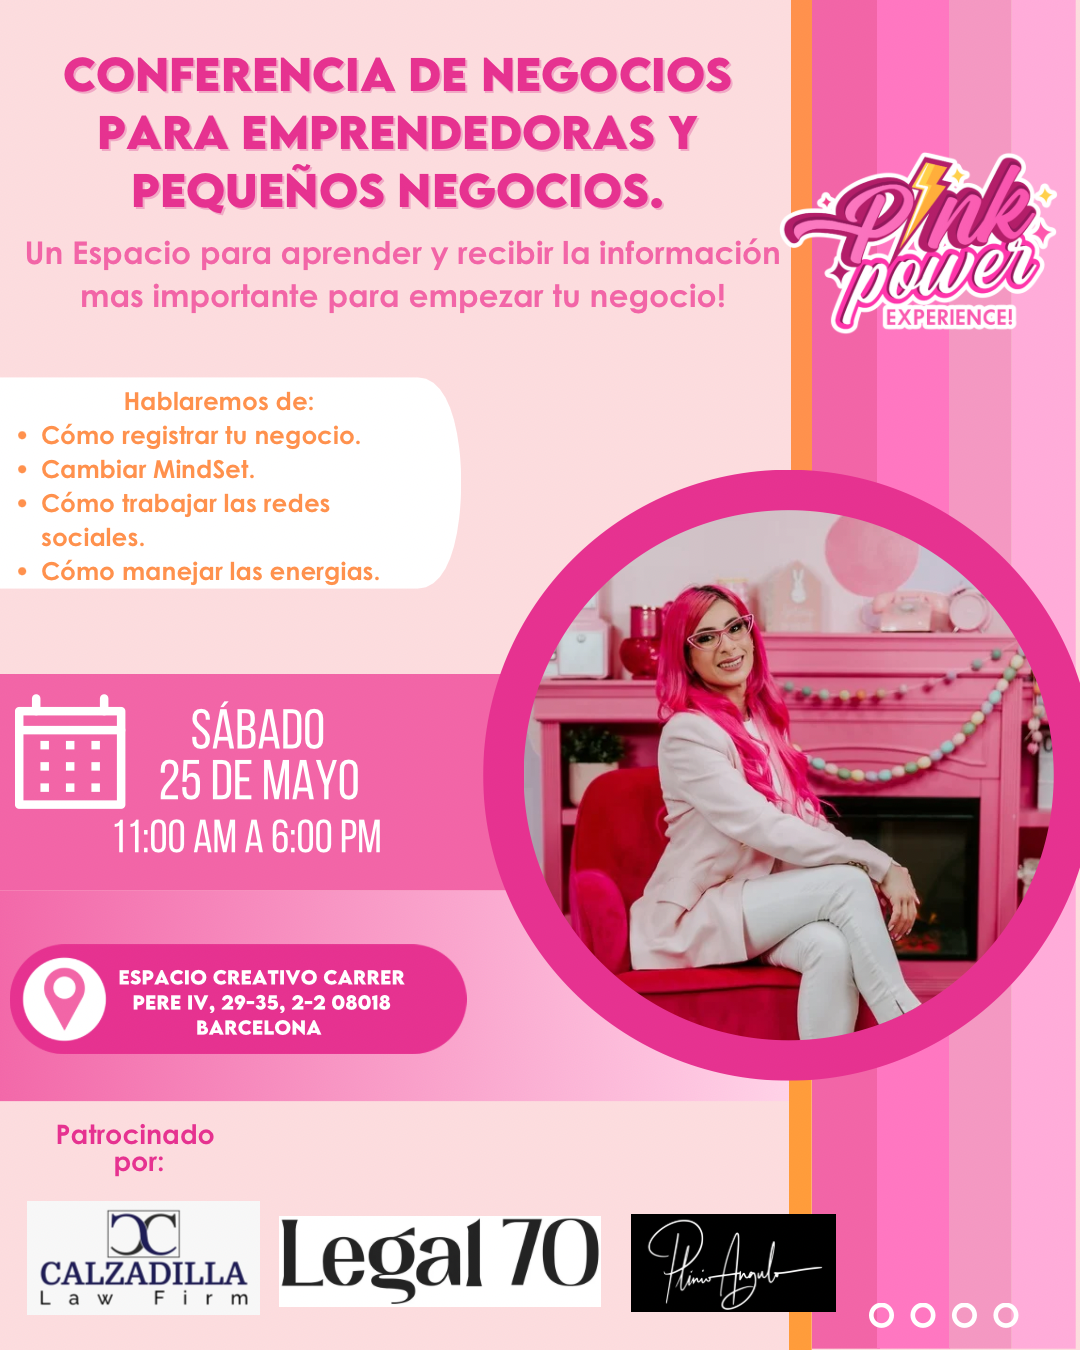 Pink Power Experience Barcelona